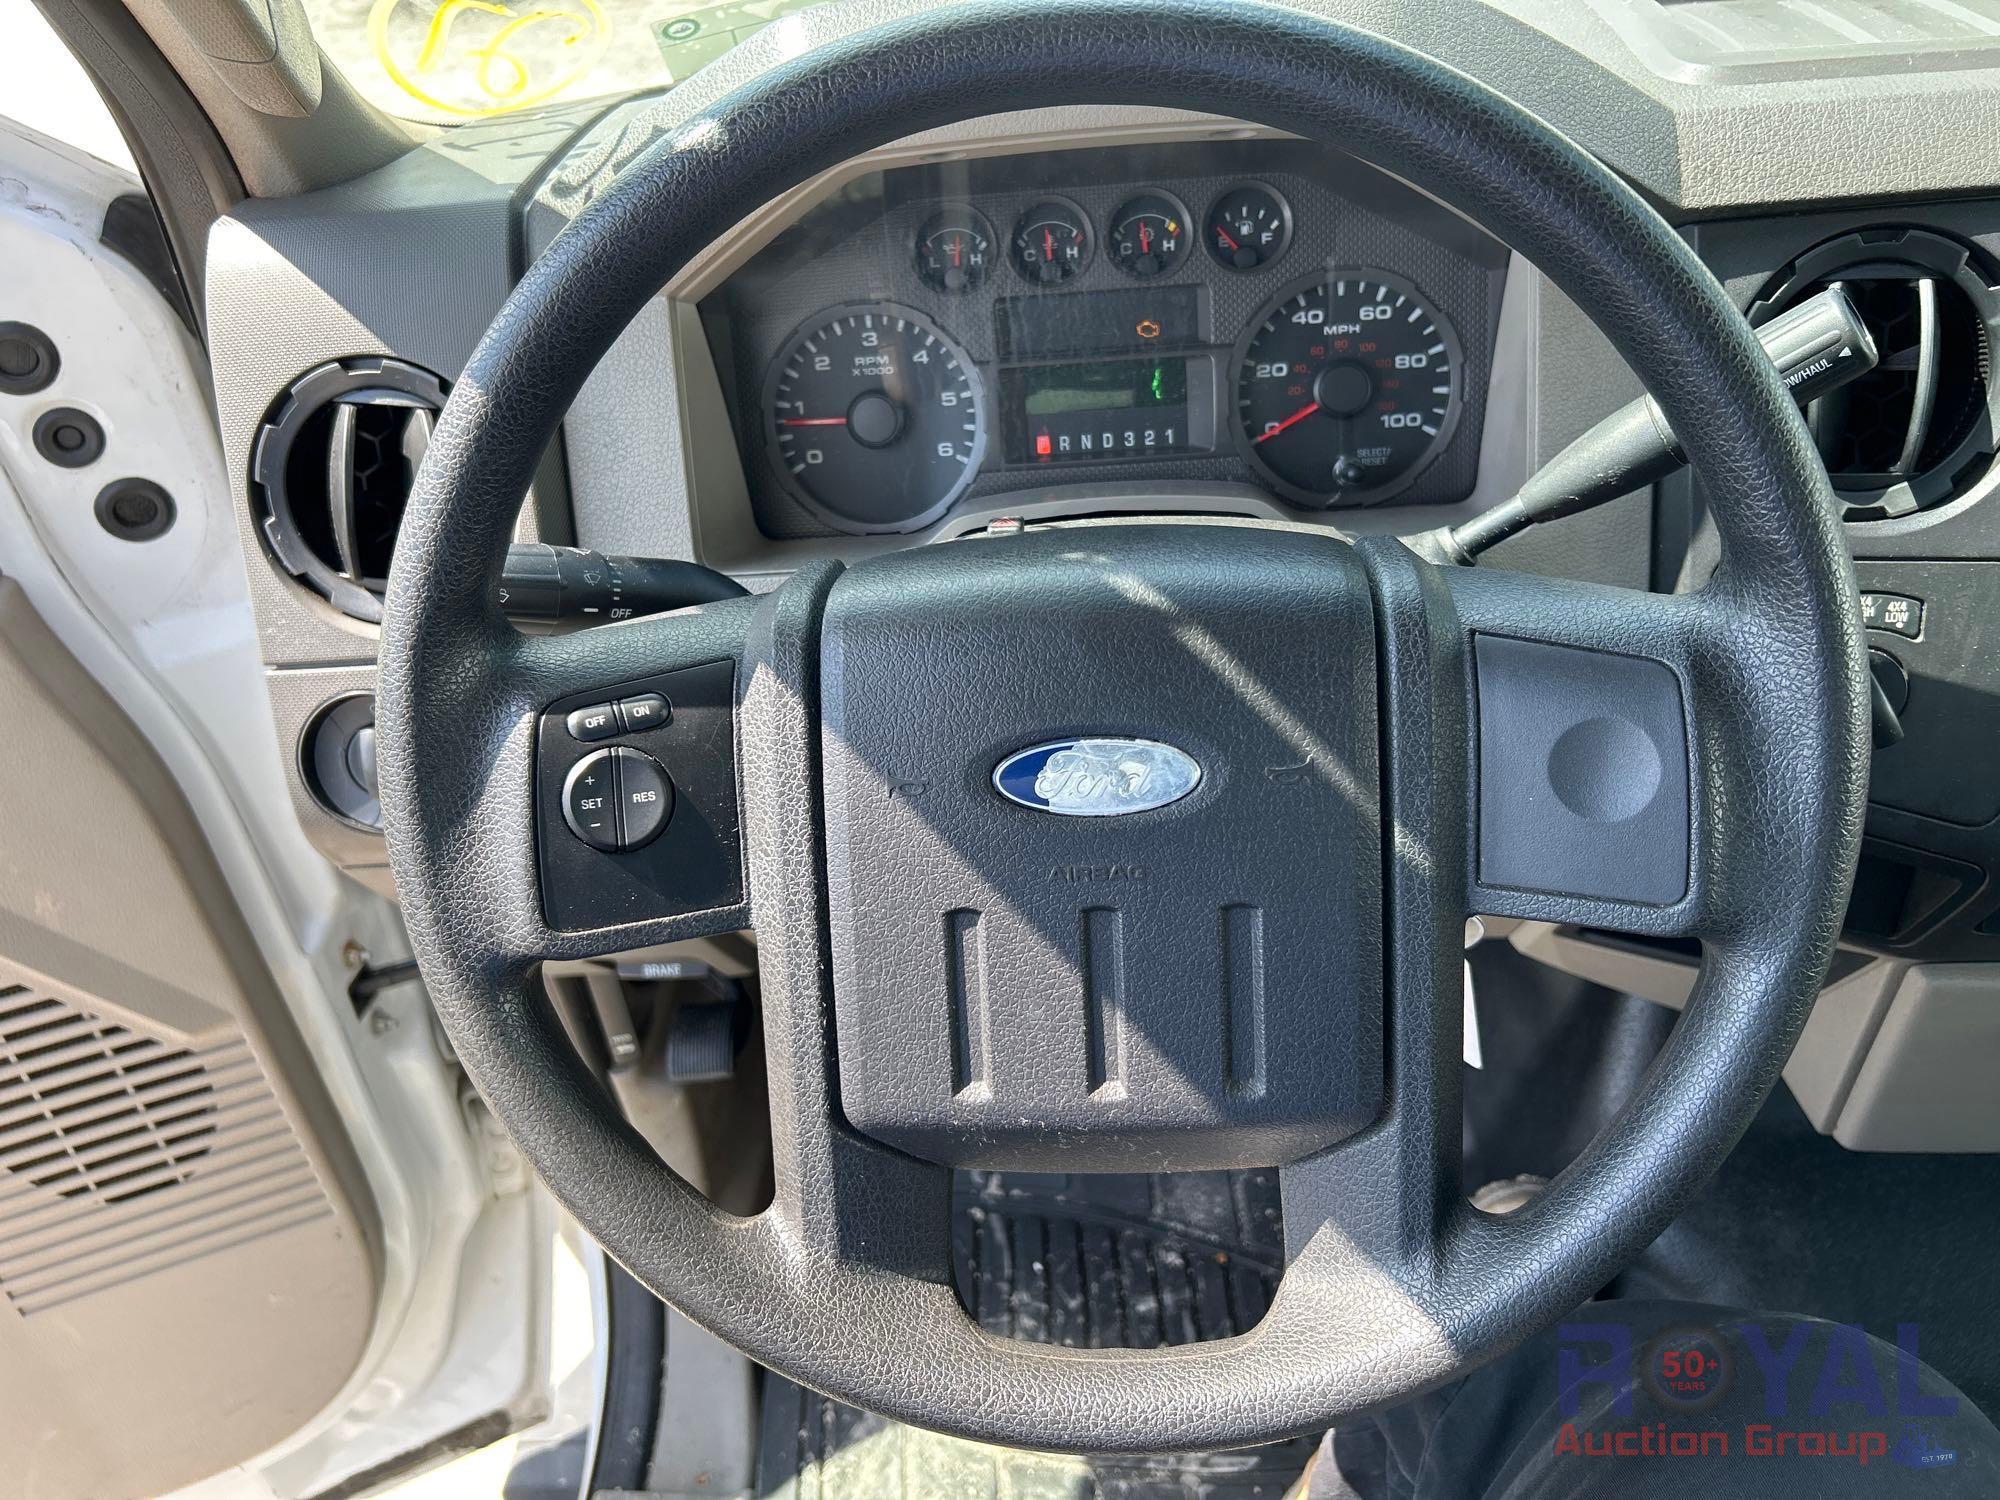 2010 Ford F450 4x4 Sewer Viewer Truck